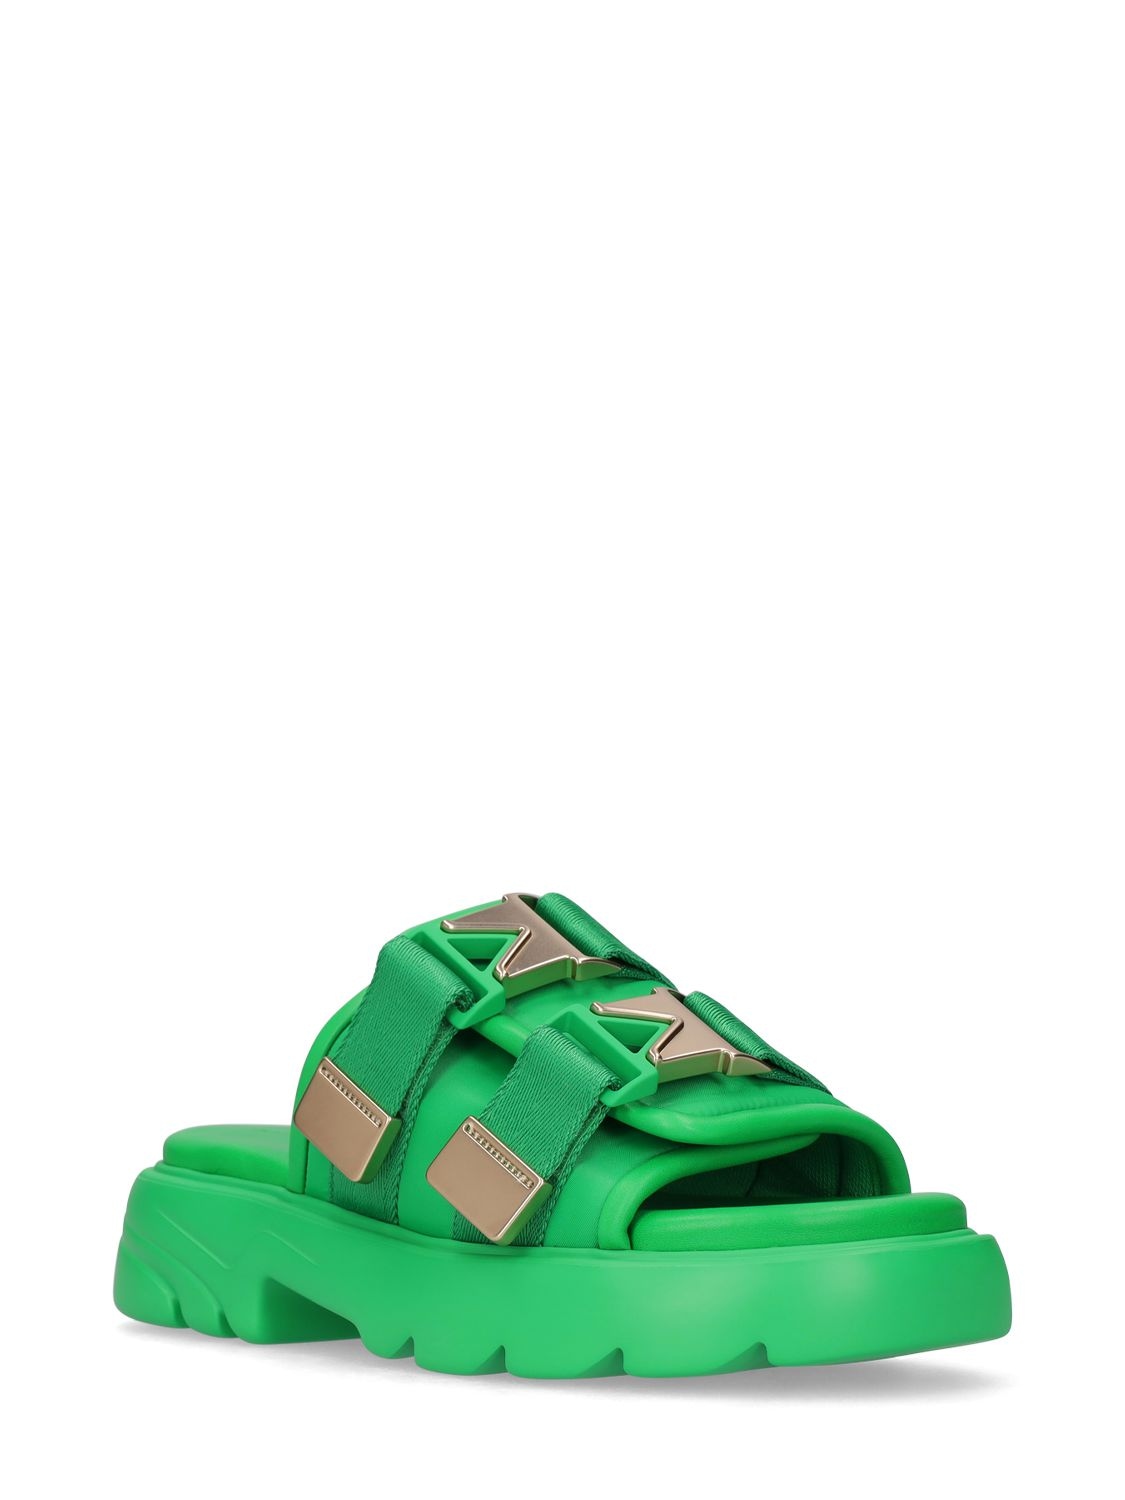 Flash Leather Dual-buckle Flat Sandals In Green